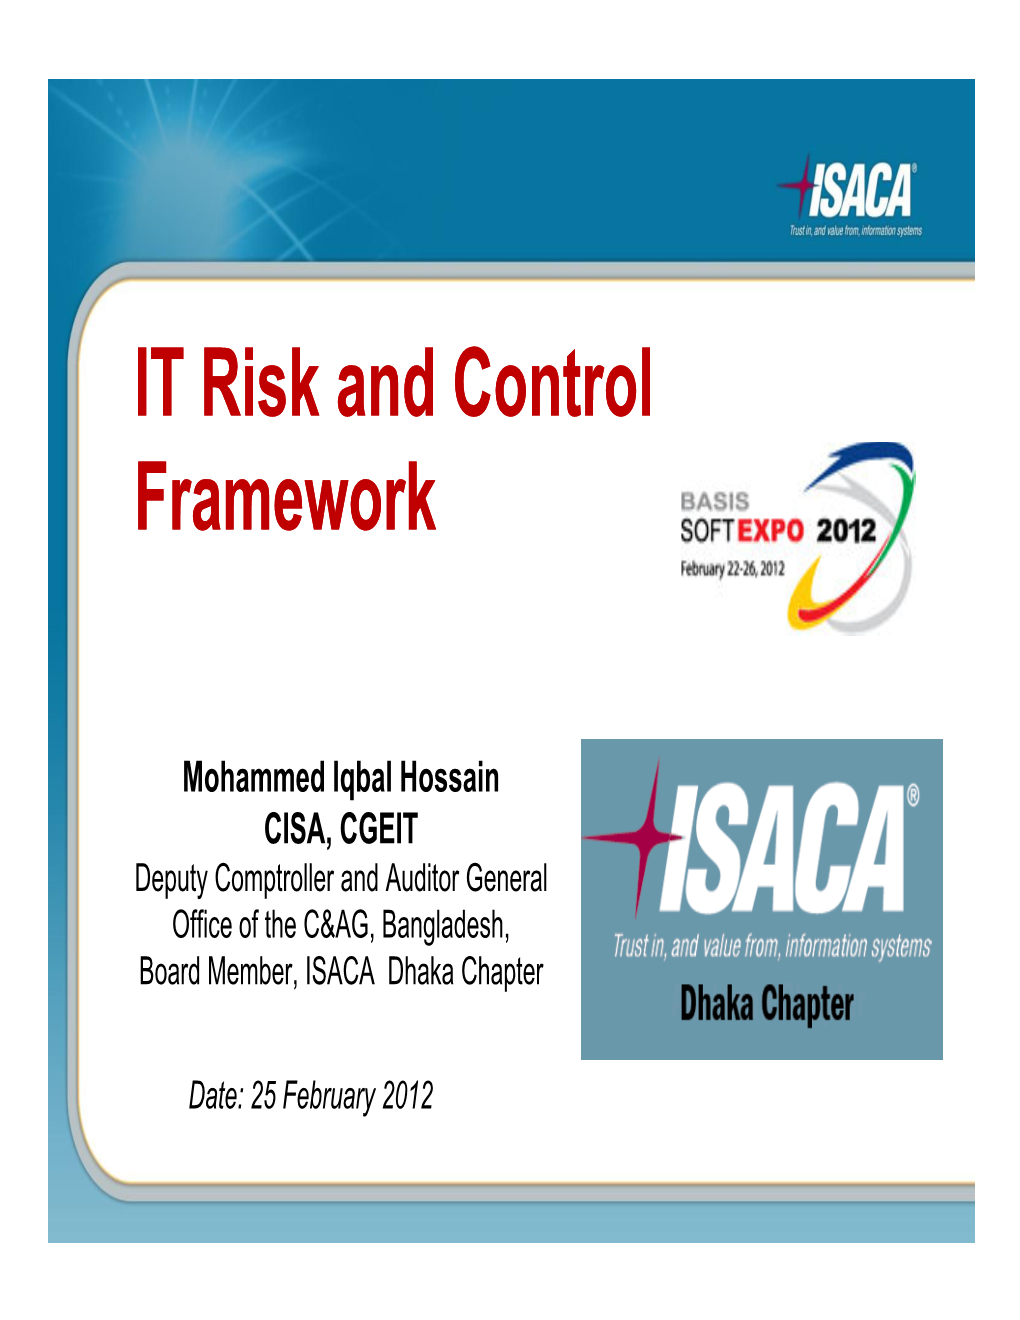 IT Risk and Control Framework